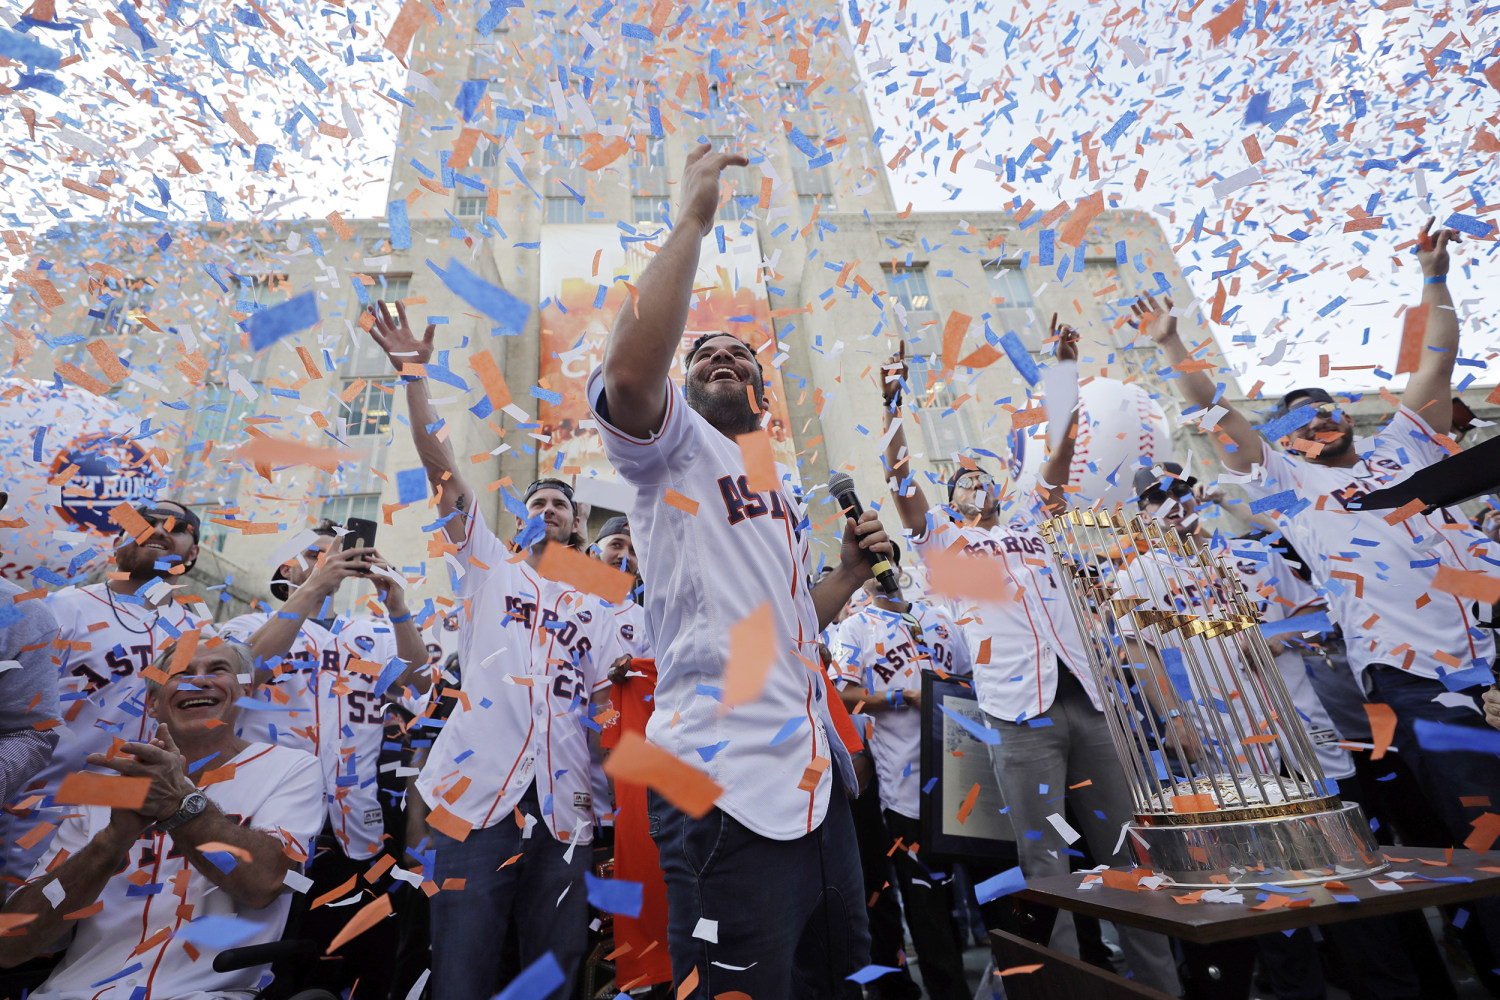 When and where will the Houston Astros World Series victory parade be?